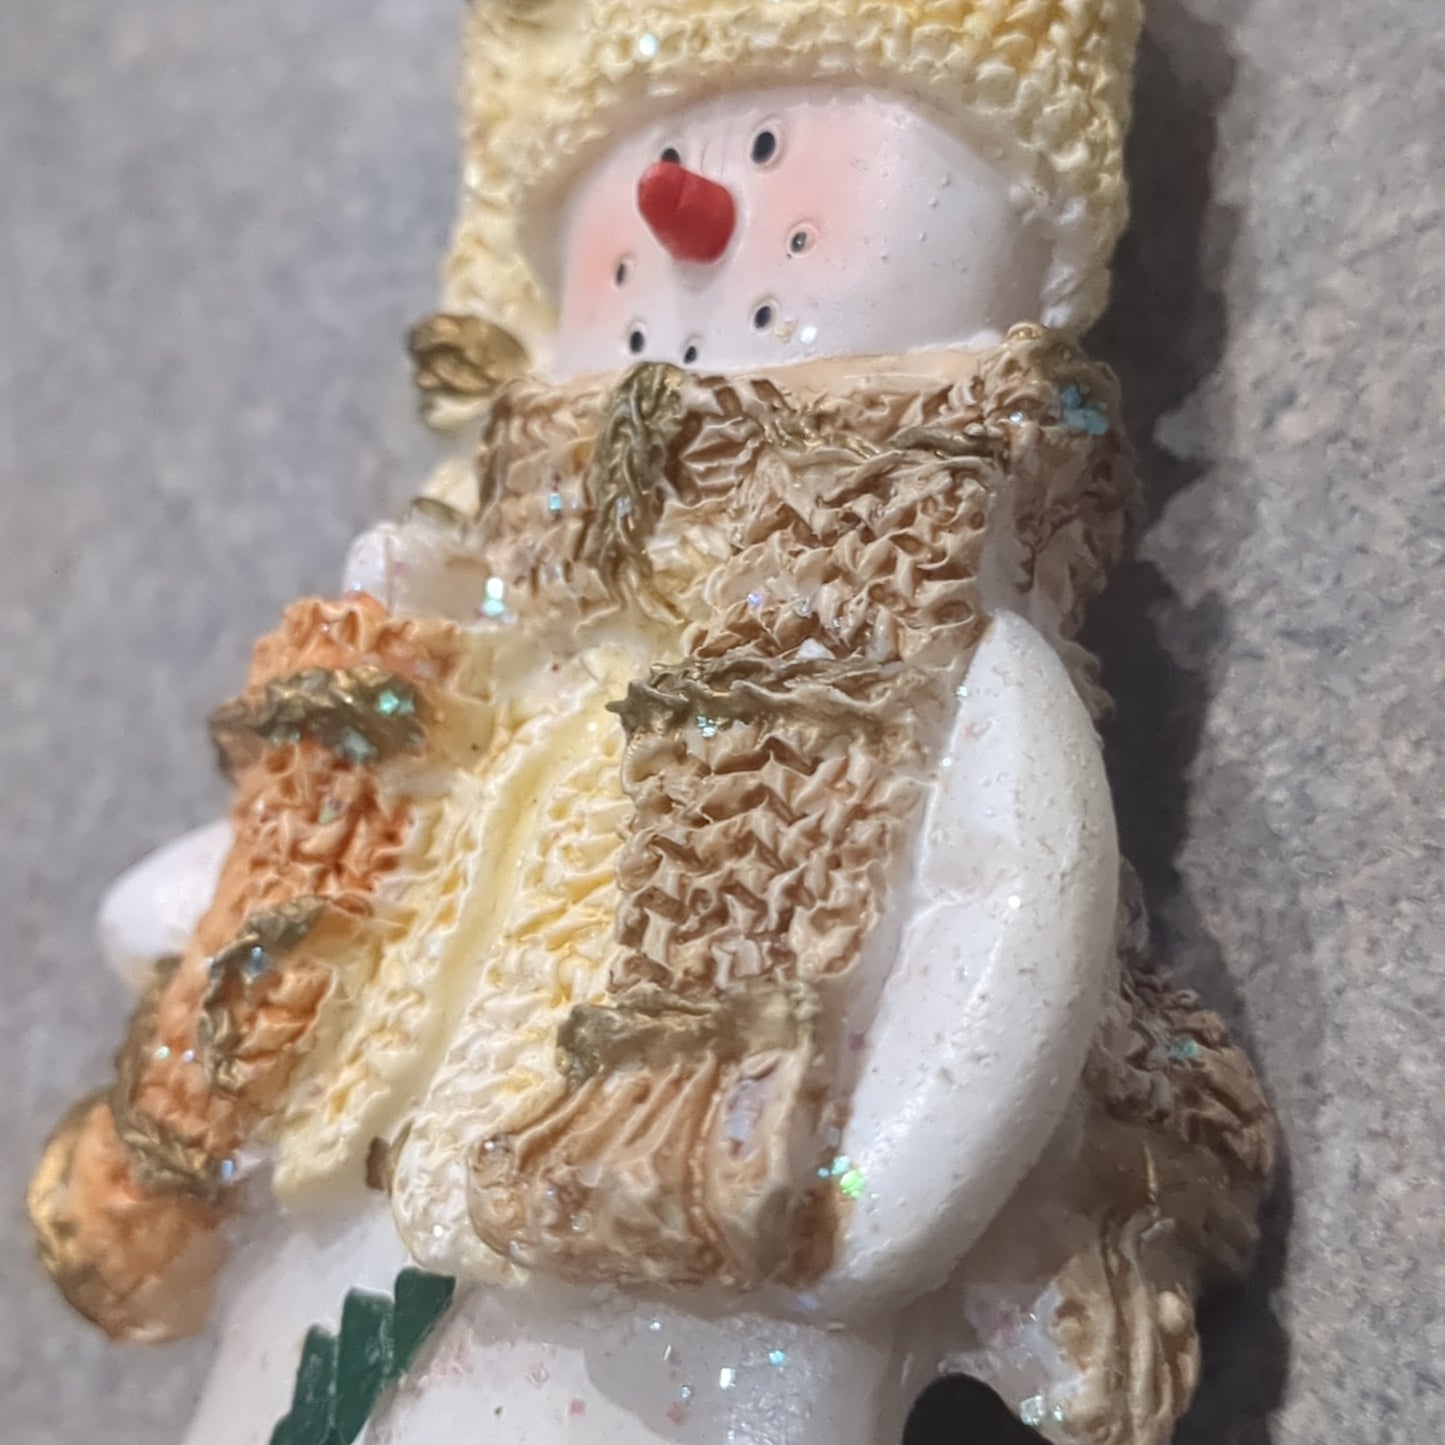 Polycrylic snowman ornament with stocking yellow